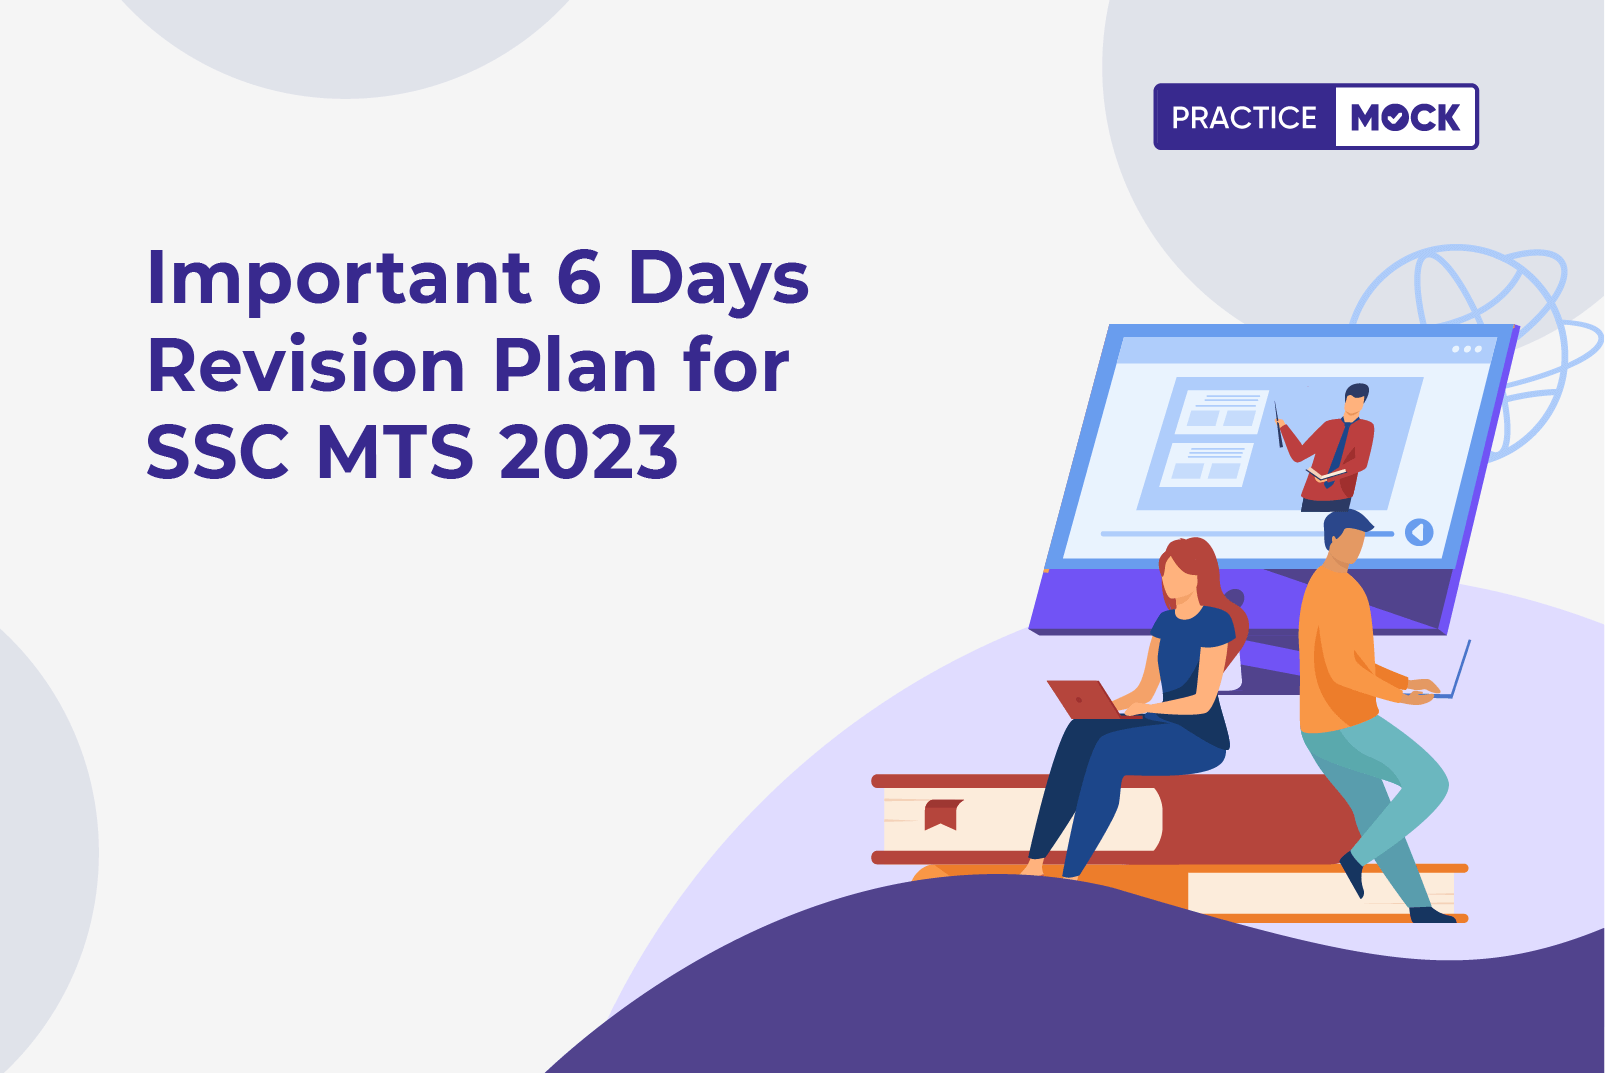 SSC MTS Revision Plan